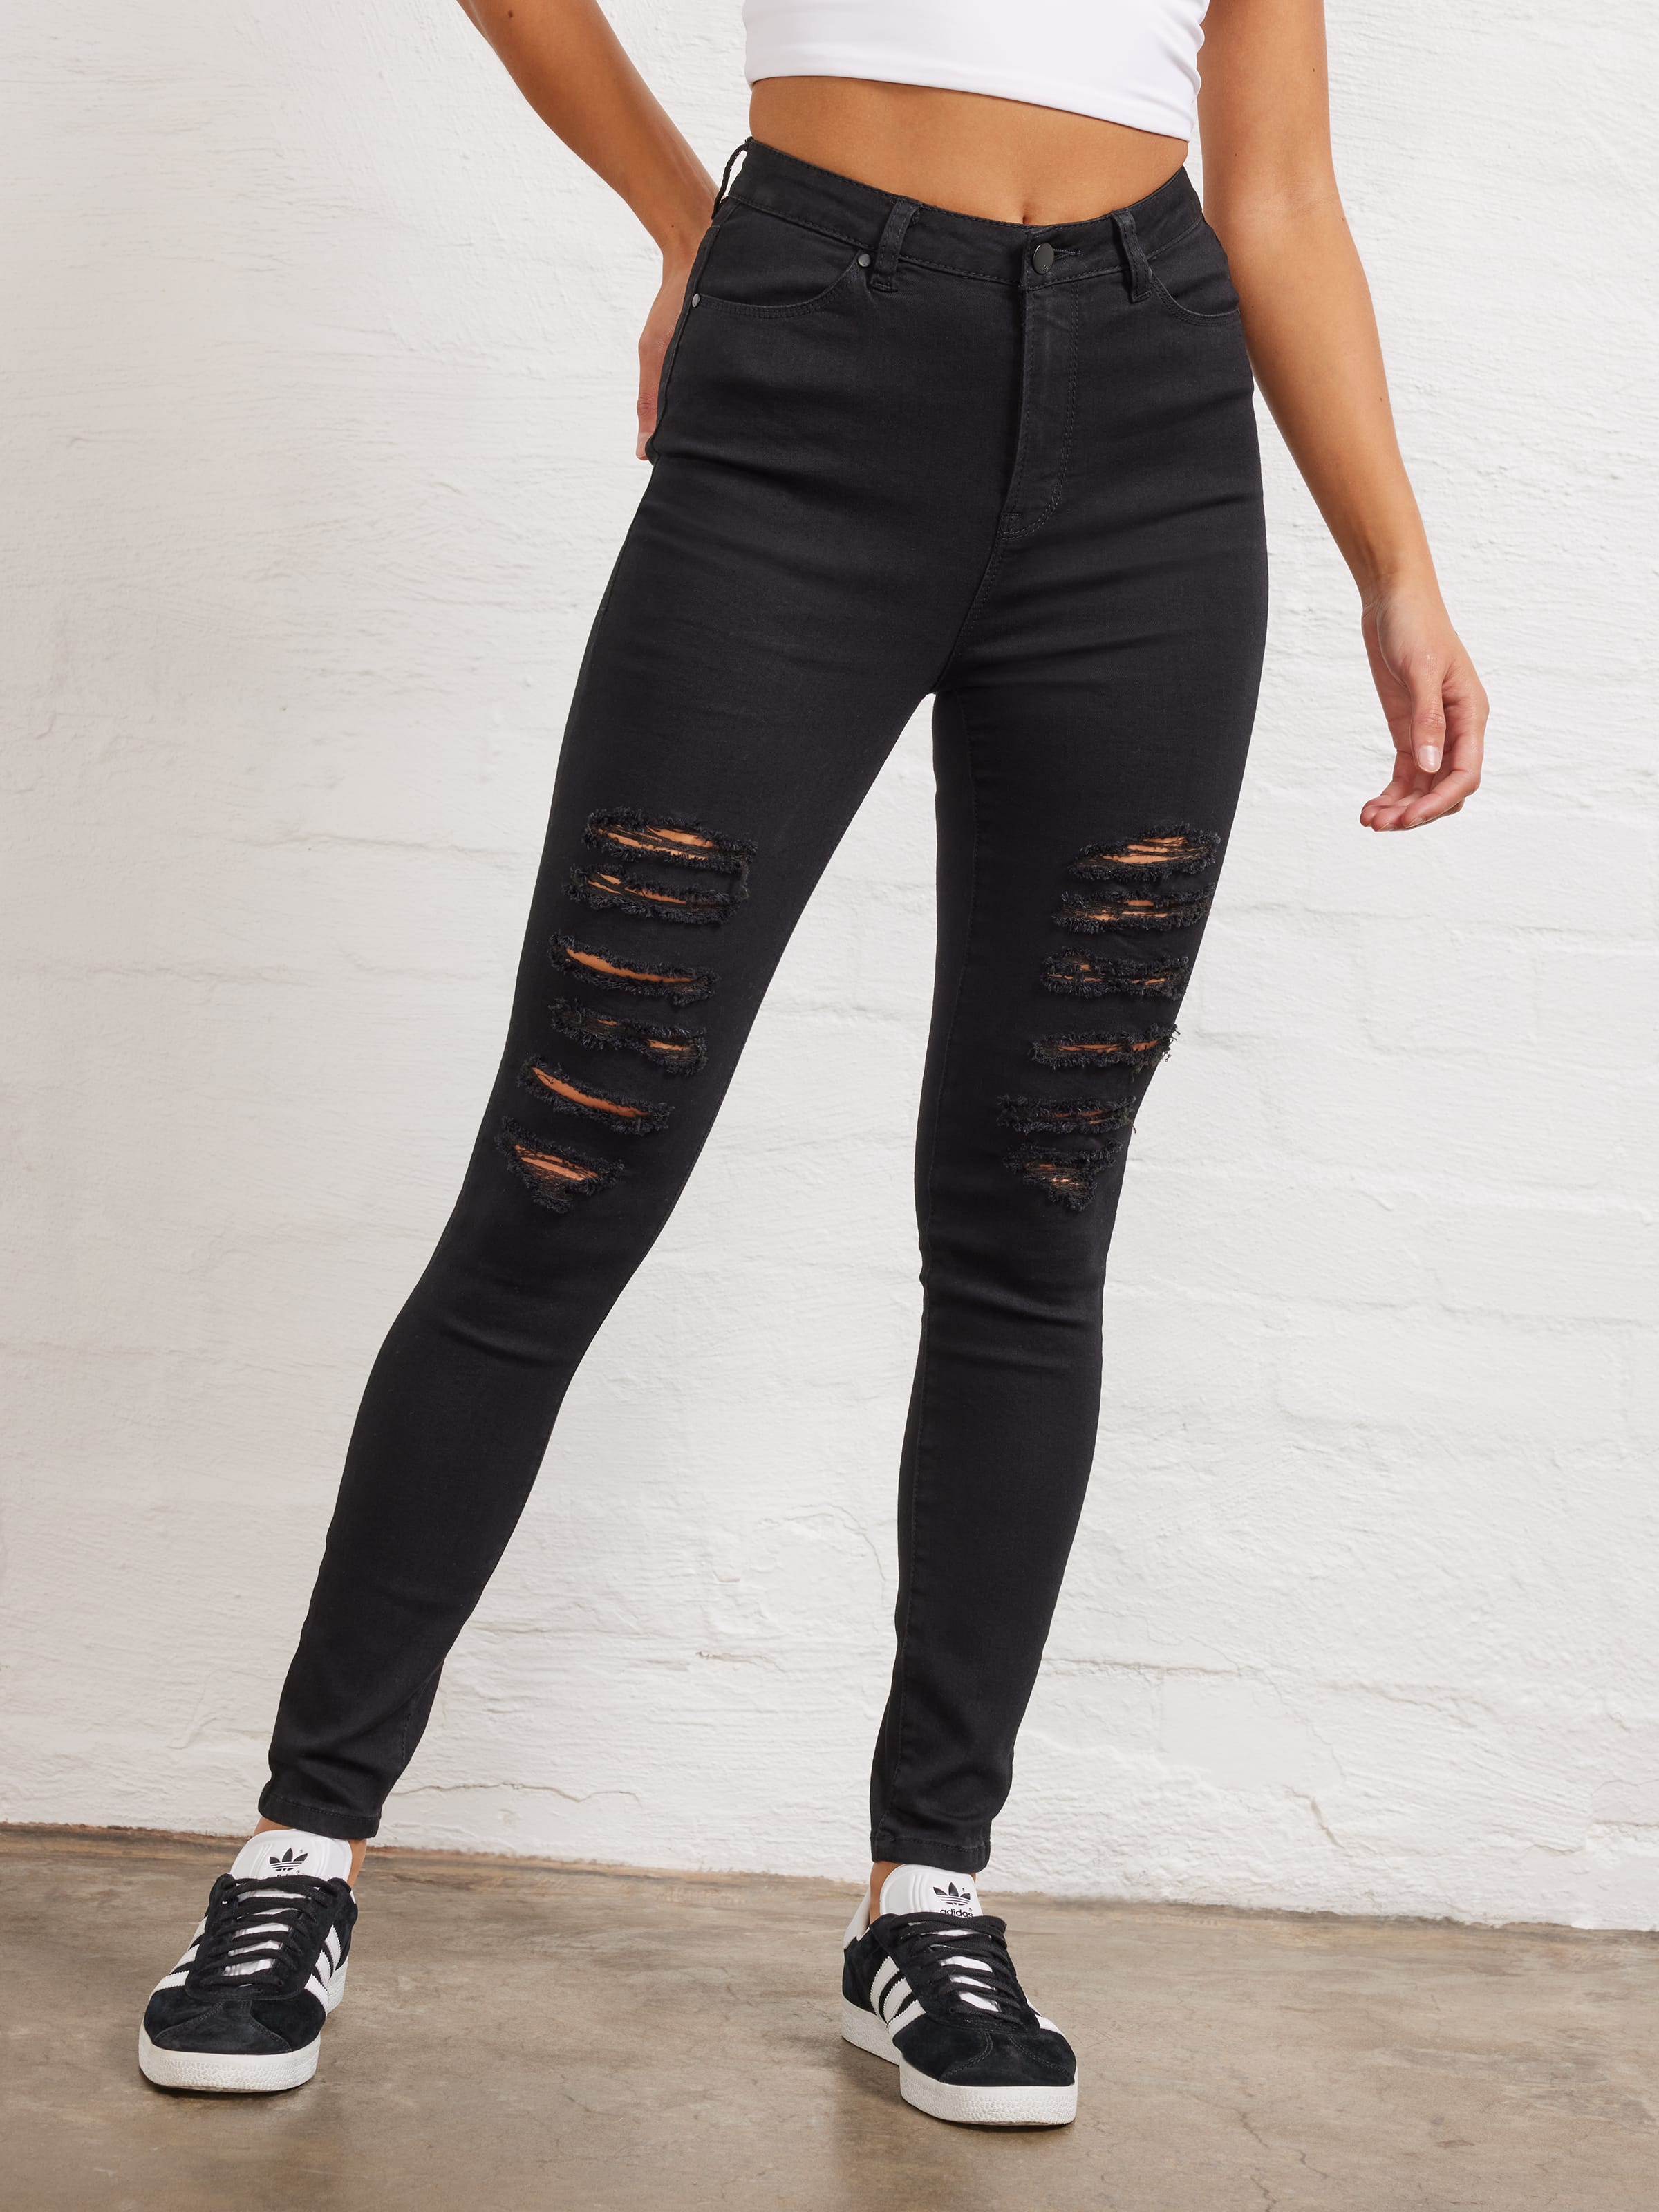 Trend Alert: Shop the Latest Ripped Jeans for Girls